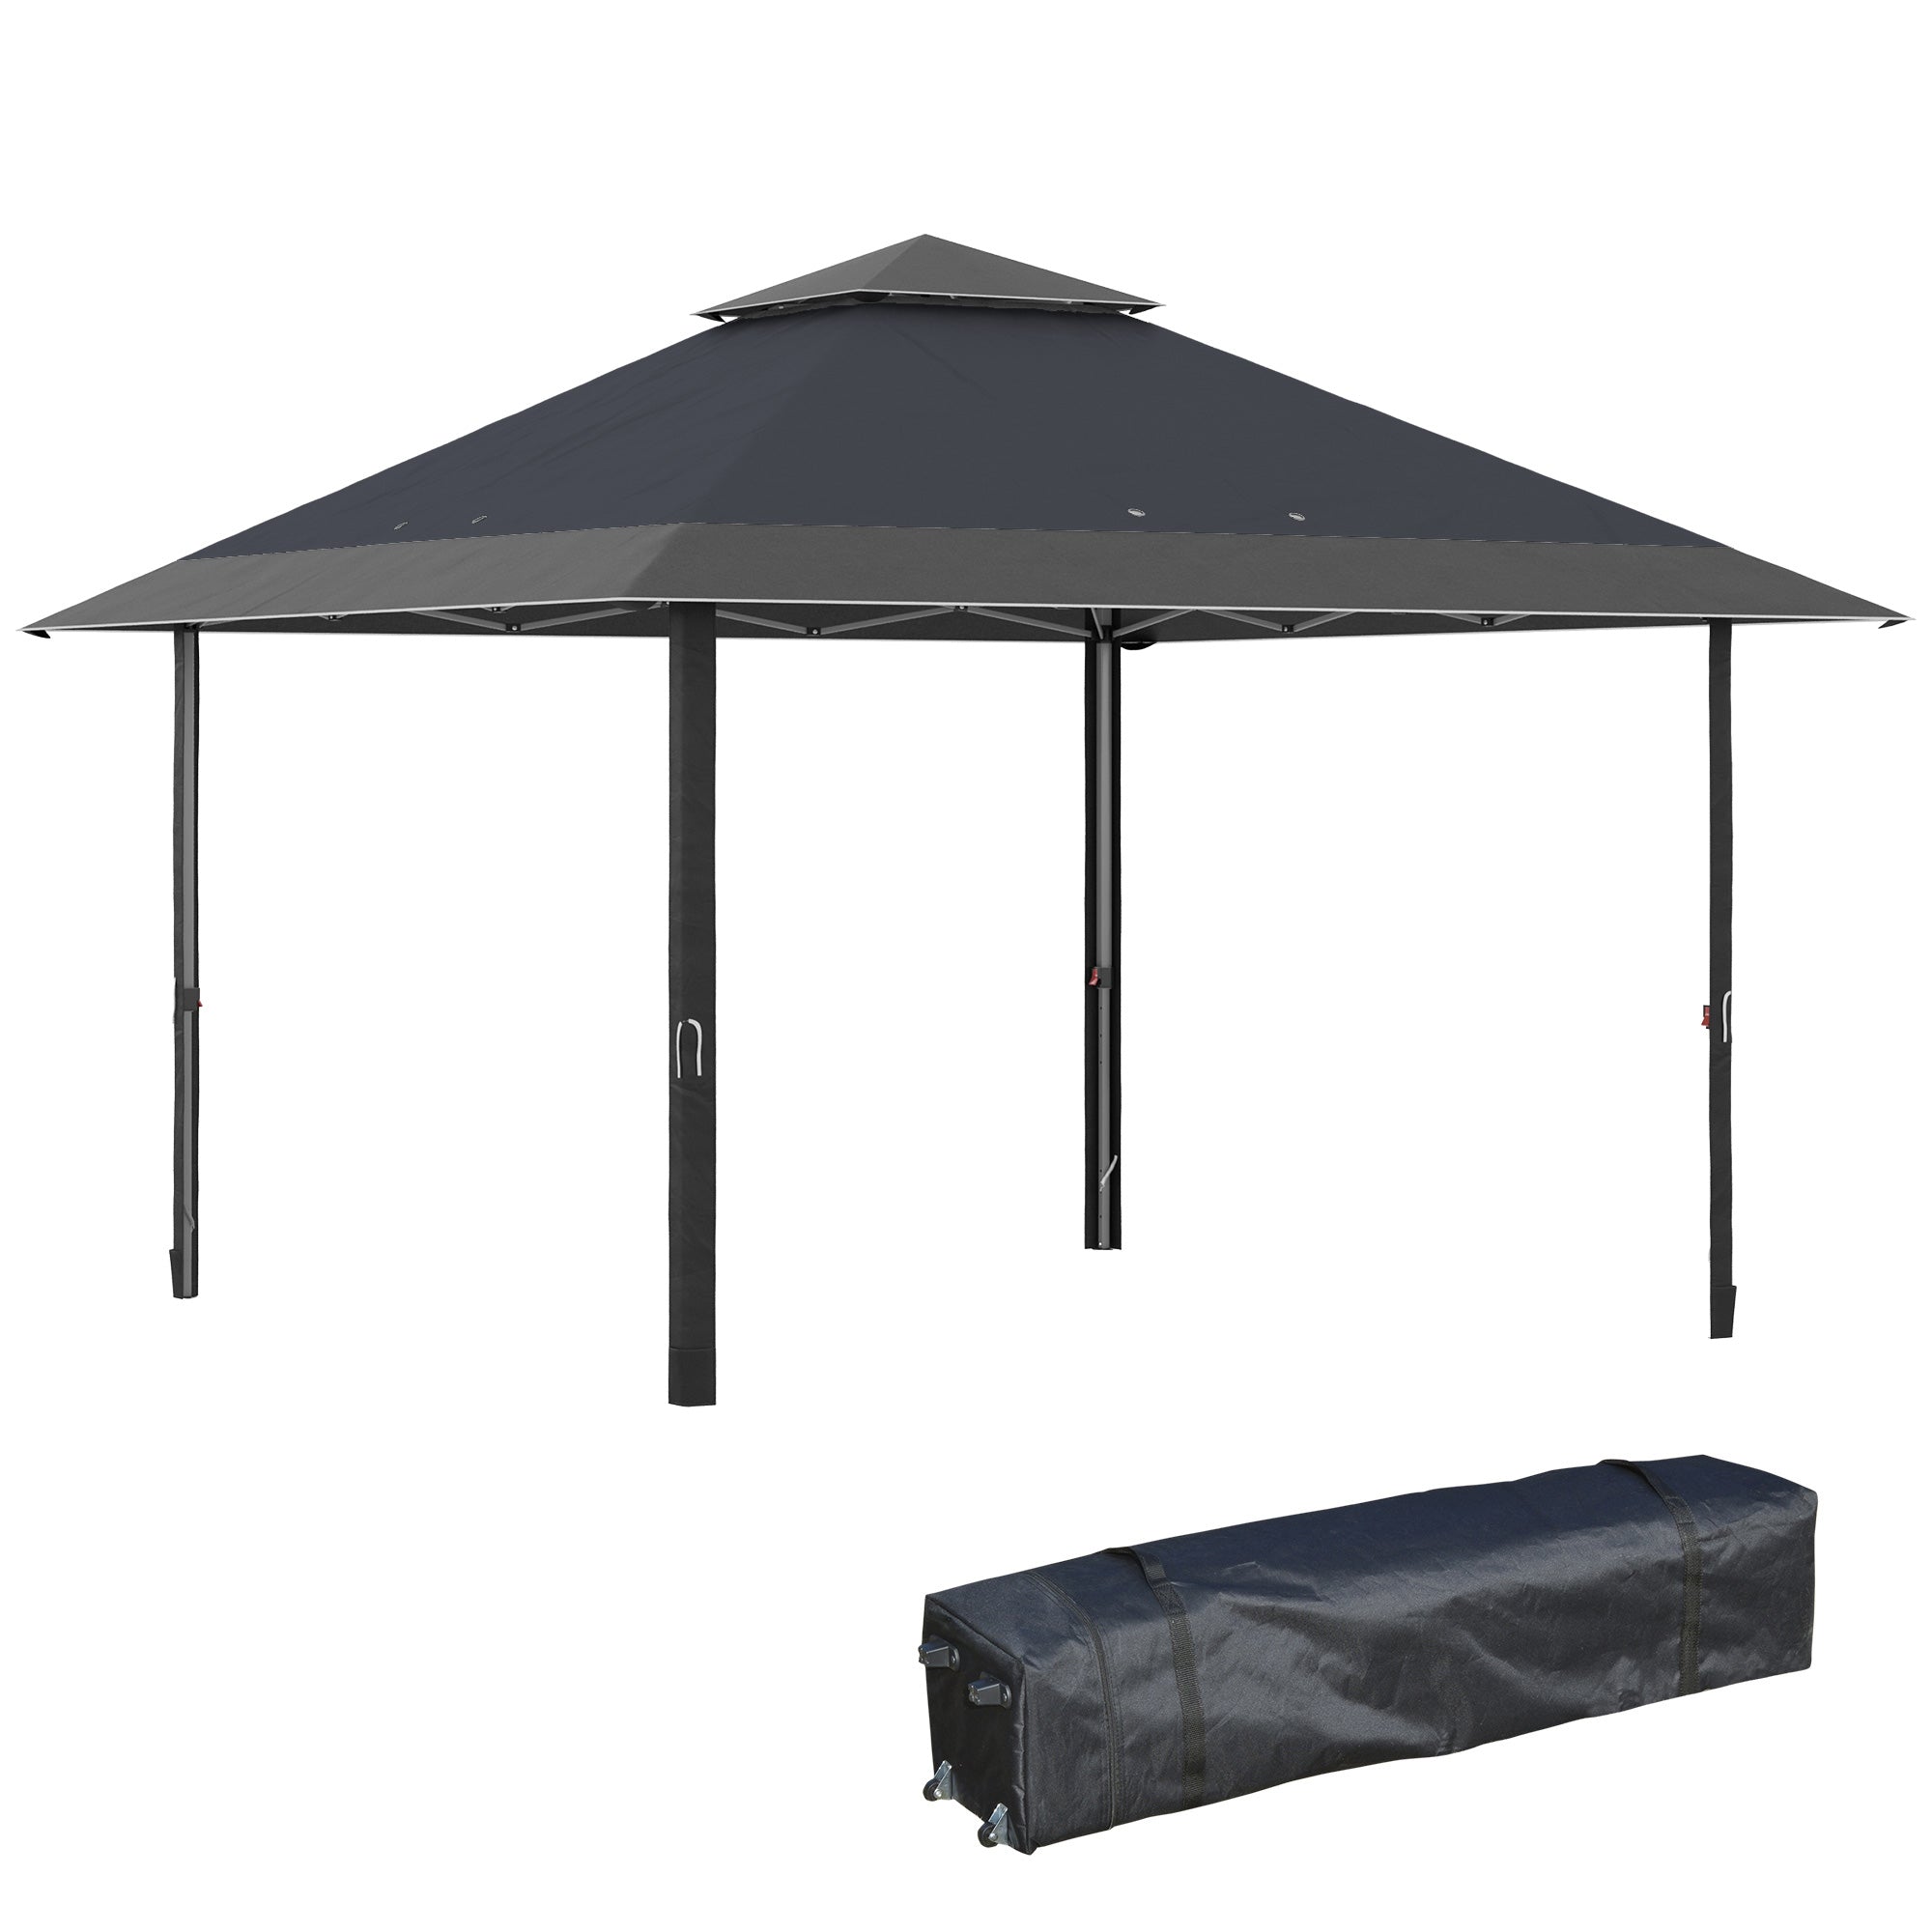 4 x 4m Pop-up Gazebo Double Roof Canopy Tent with UV Proof, Roller Bag & Adjustable Legs Outdoor Party, Steel Frame, Grey-0